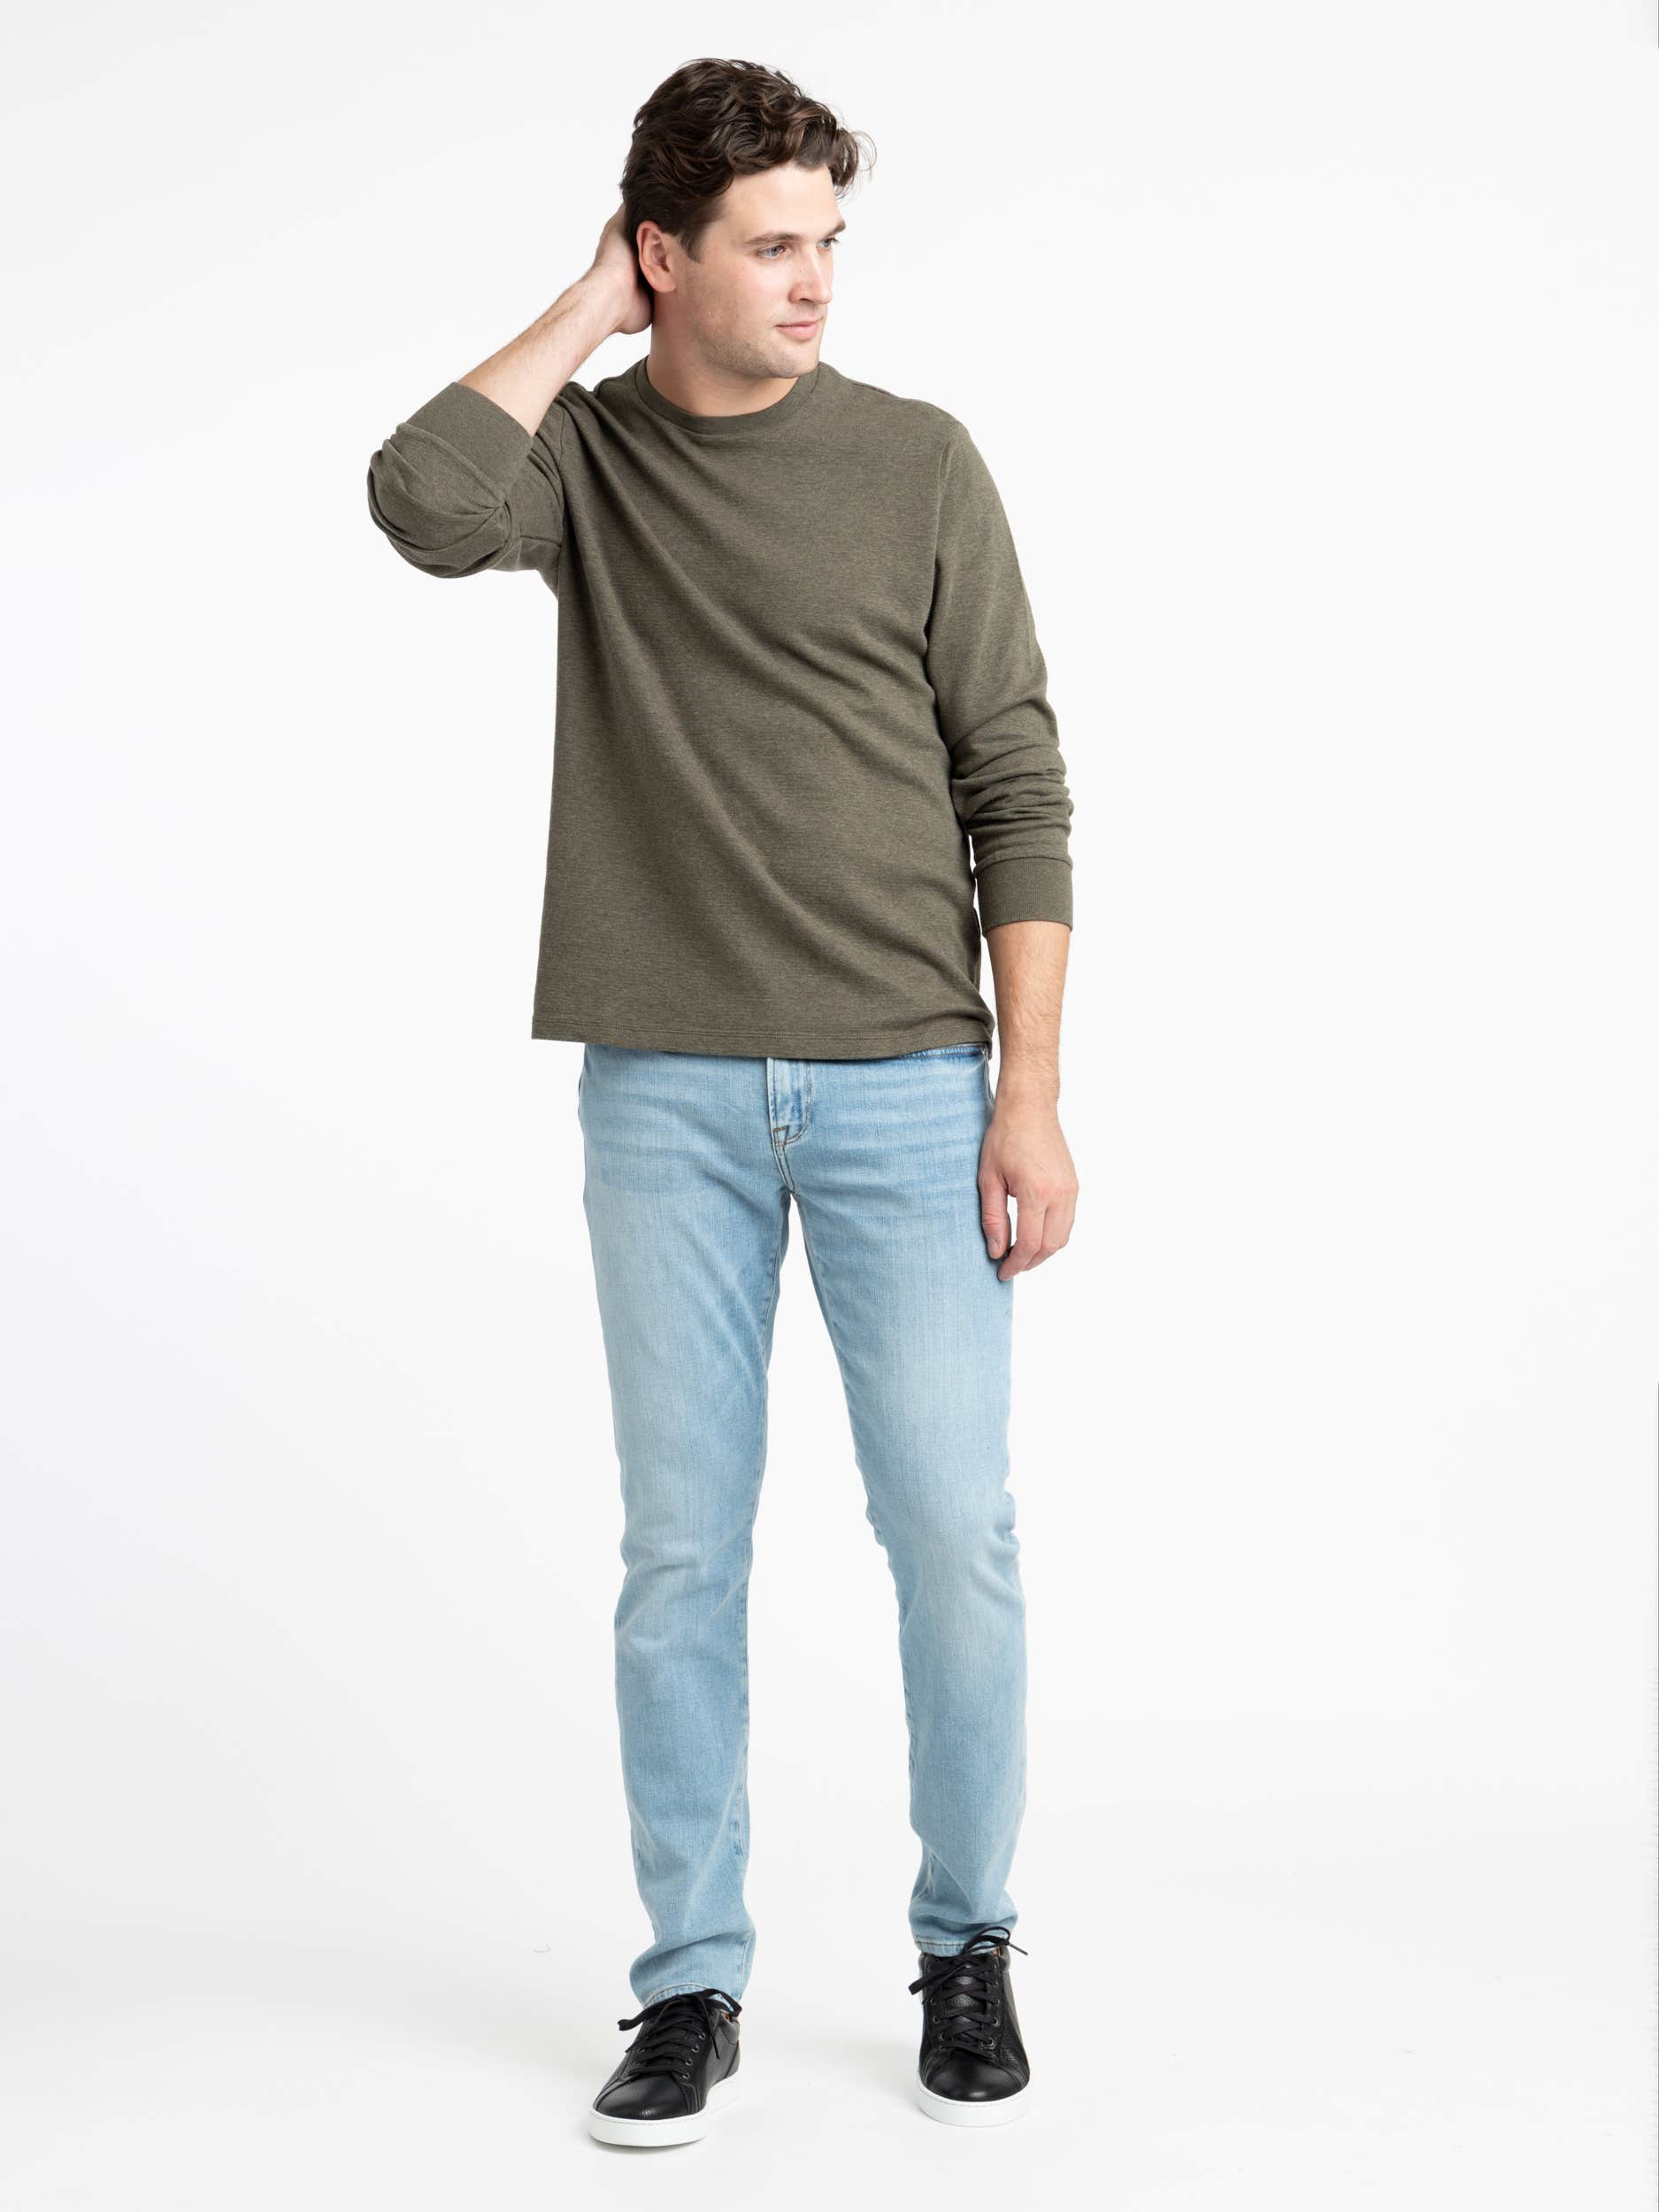 Olive Green Duo Fold Long Sleeve Crew